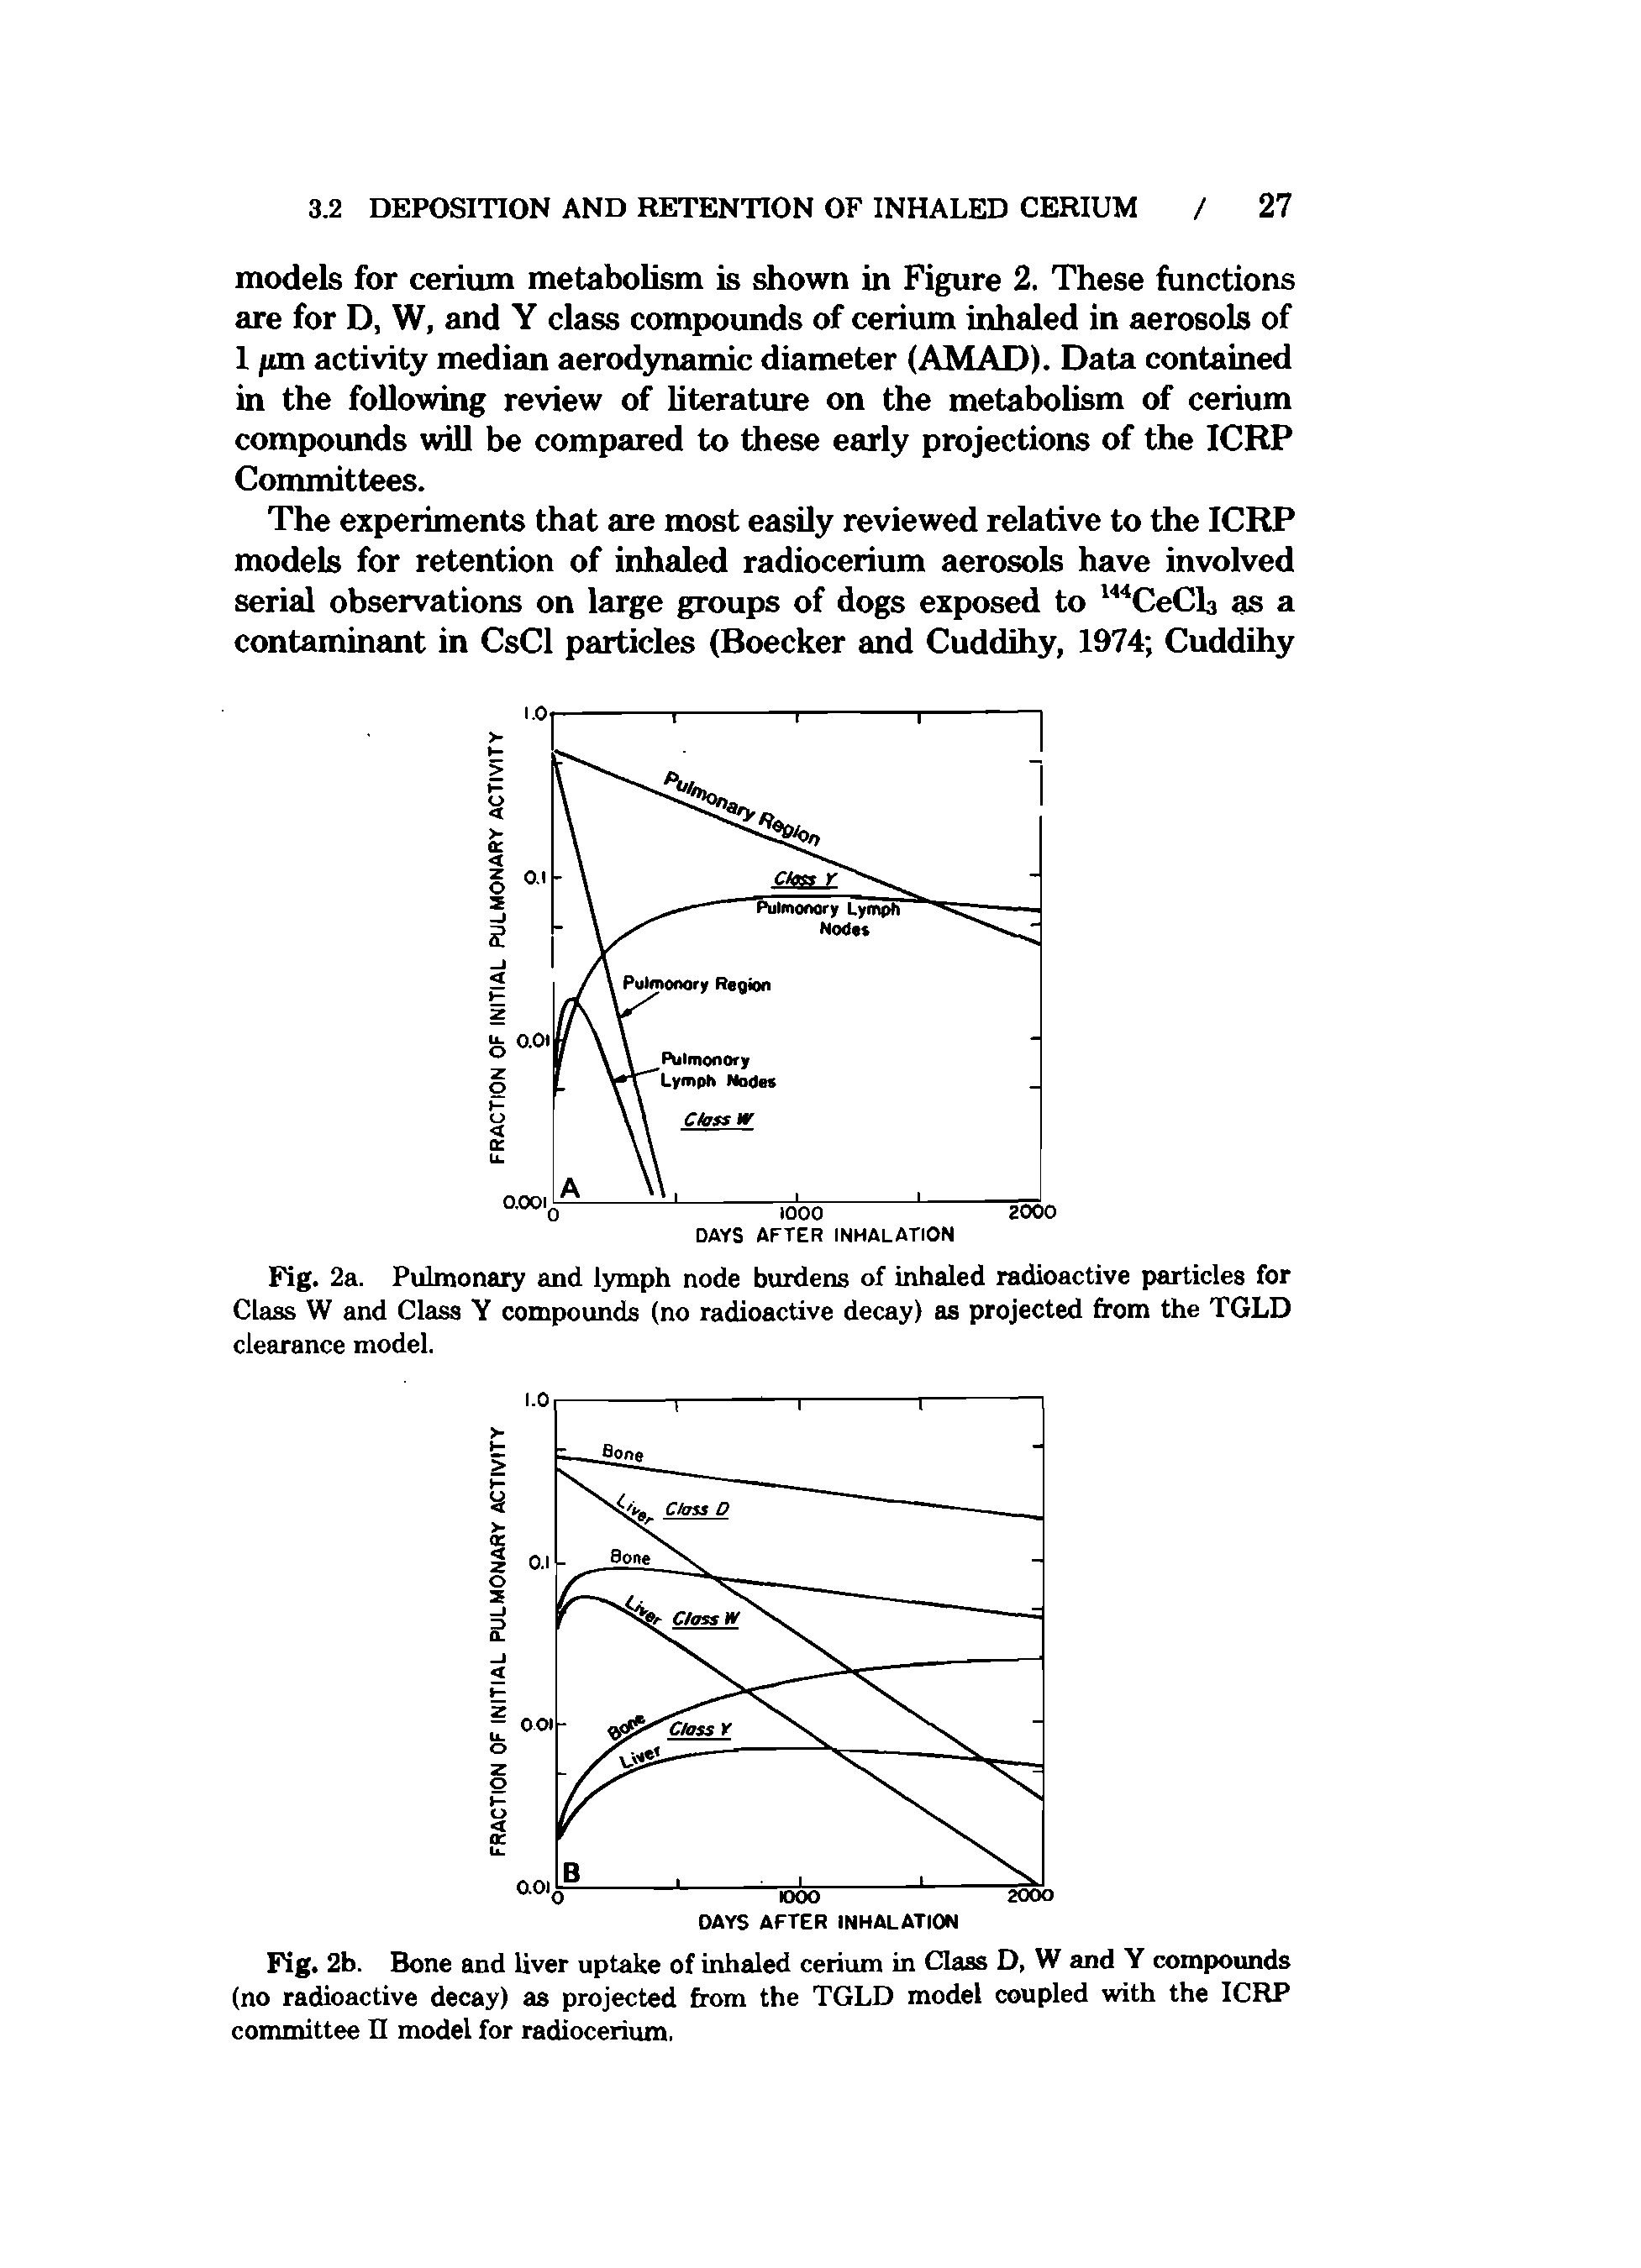 Fig. 2a. Pulmonary and lymph node burdens of inhaled radioactive particles for Class W and Class Y compounds (no radioactive decay) as projected from the TGLD clearance model.